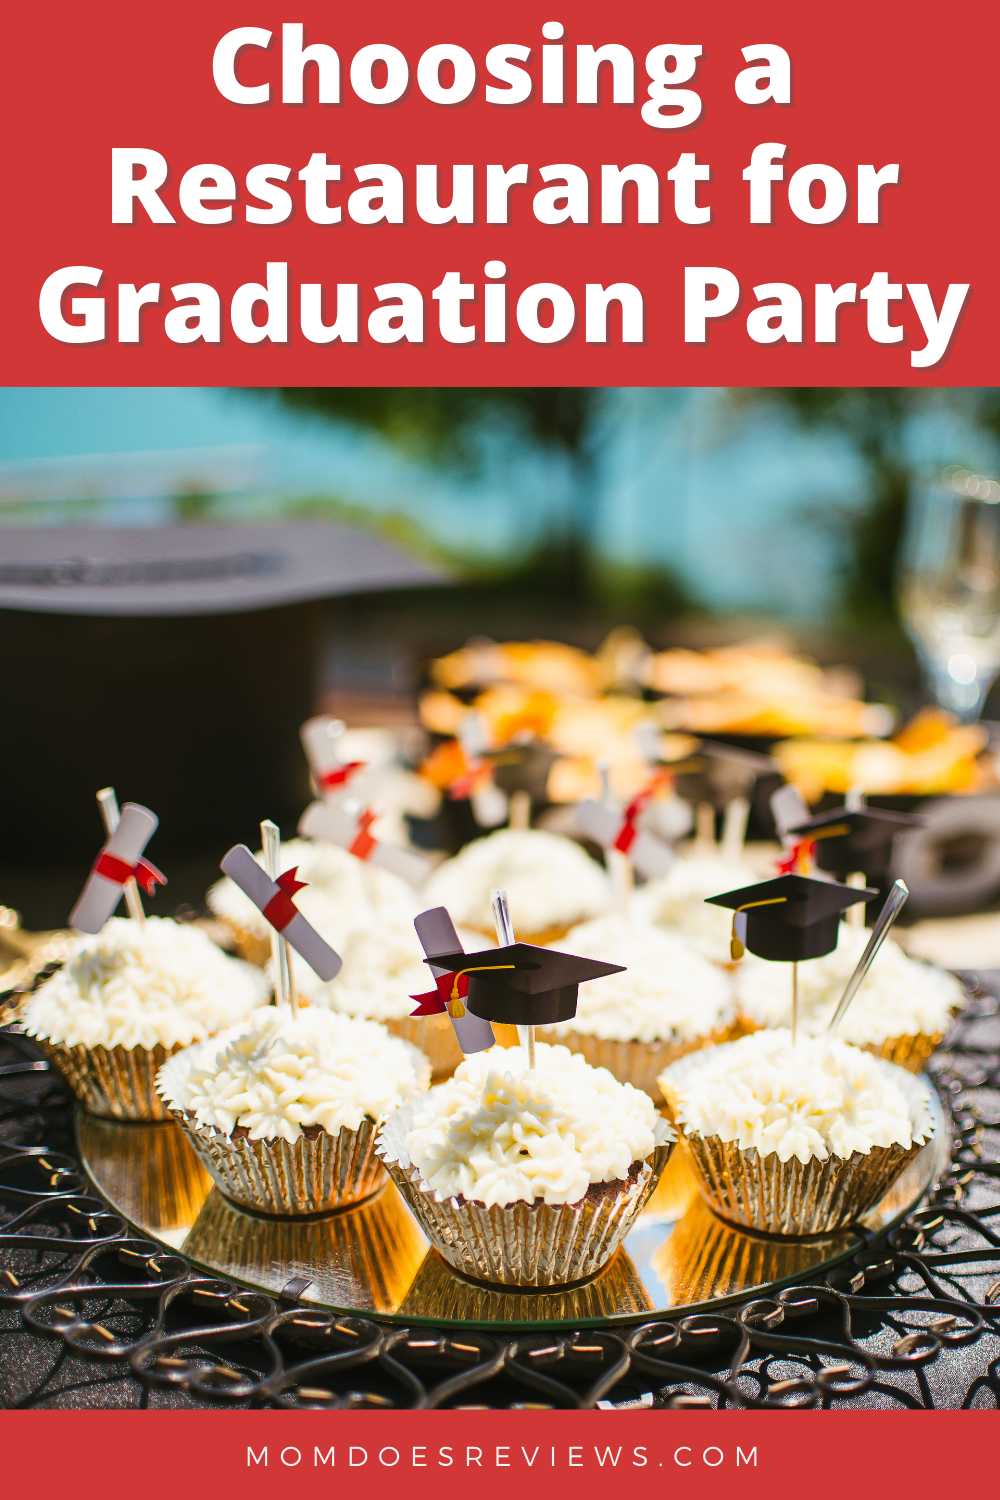 Graduating Child Celebration: 4 Things To Consider When Evaluating Restaurants For The Party